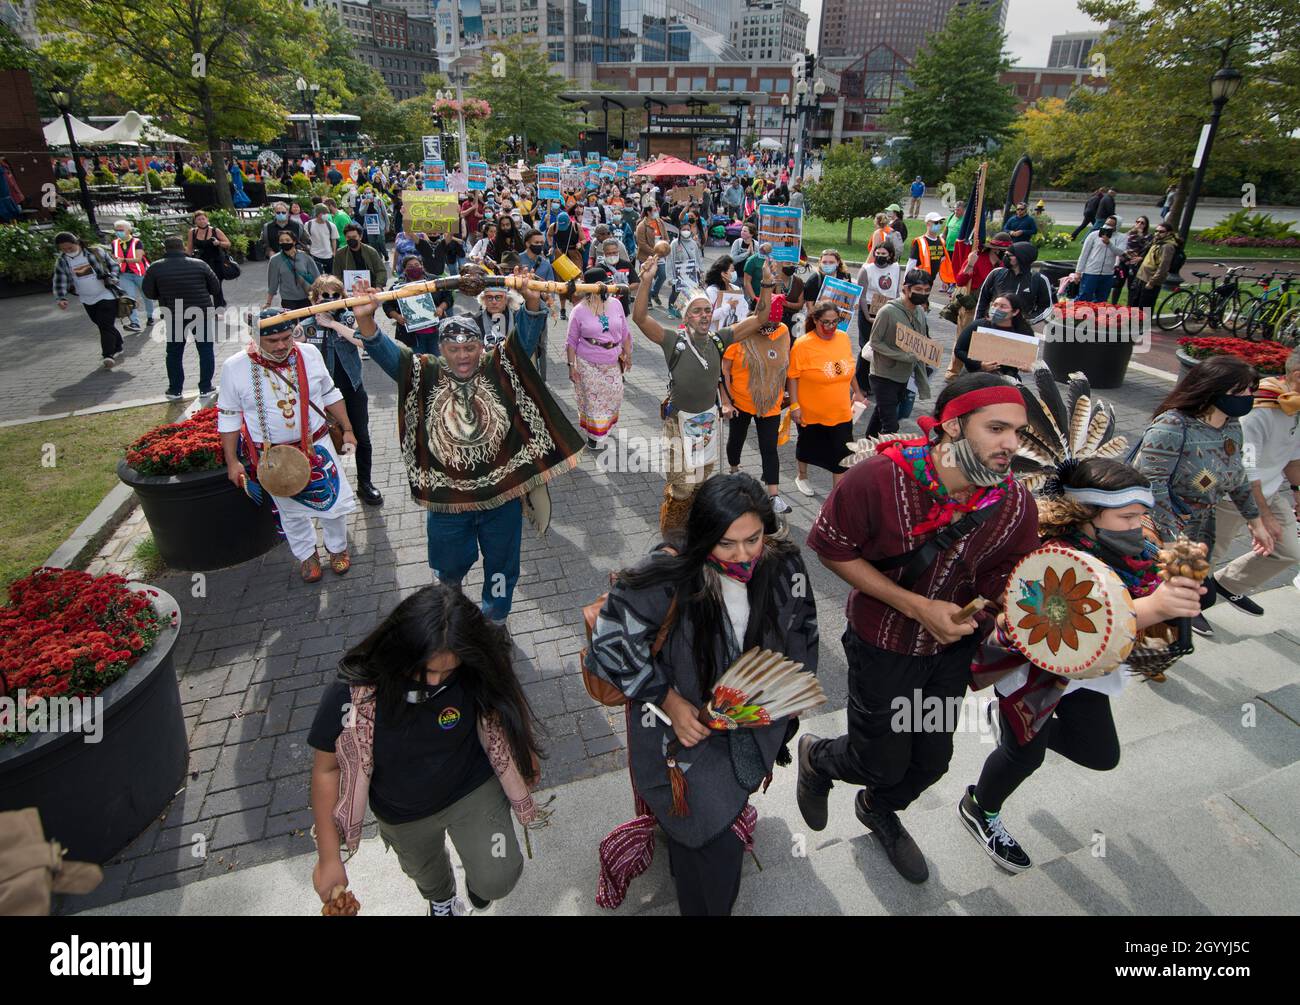 Rally supporting Indigenous Peoples Day, Boston, Massachusetts, USA.  09 Oct. 2021. Over 500 Native Americans and supporters gathered at the Boston Common and marched through central Boston to the waterfront at Christopher Columbus Park.  Earlier in the week acting Boston Mayor Kim Janey signed an executive order making the second Monday of October “Indigenous Peoples Day” in Boston.  As of October of 2021 eight U.S. states and Washington D.C. have proclaimed Indigenous Peoples Day a holiday. Credit: Chuck Nacke / Alamy Stock Photo